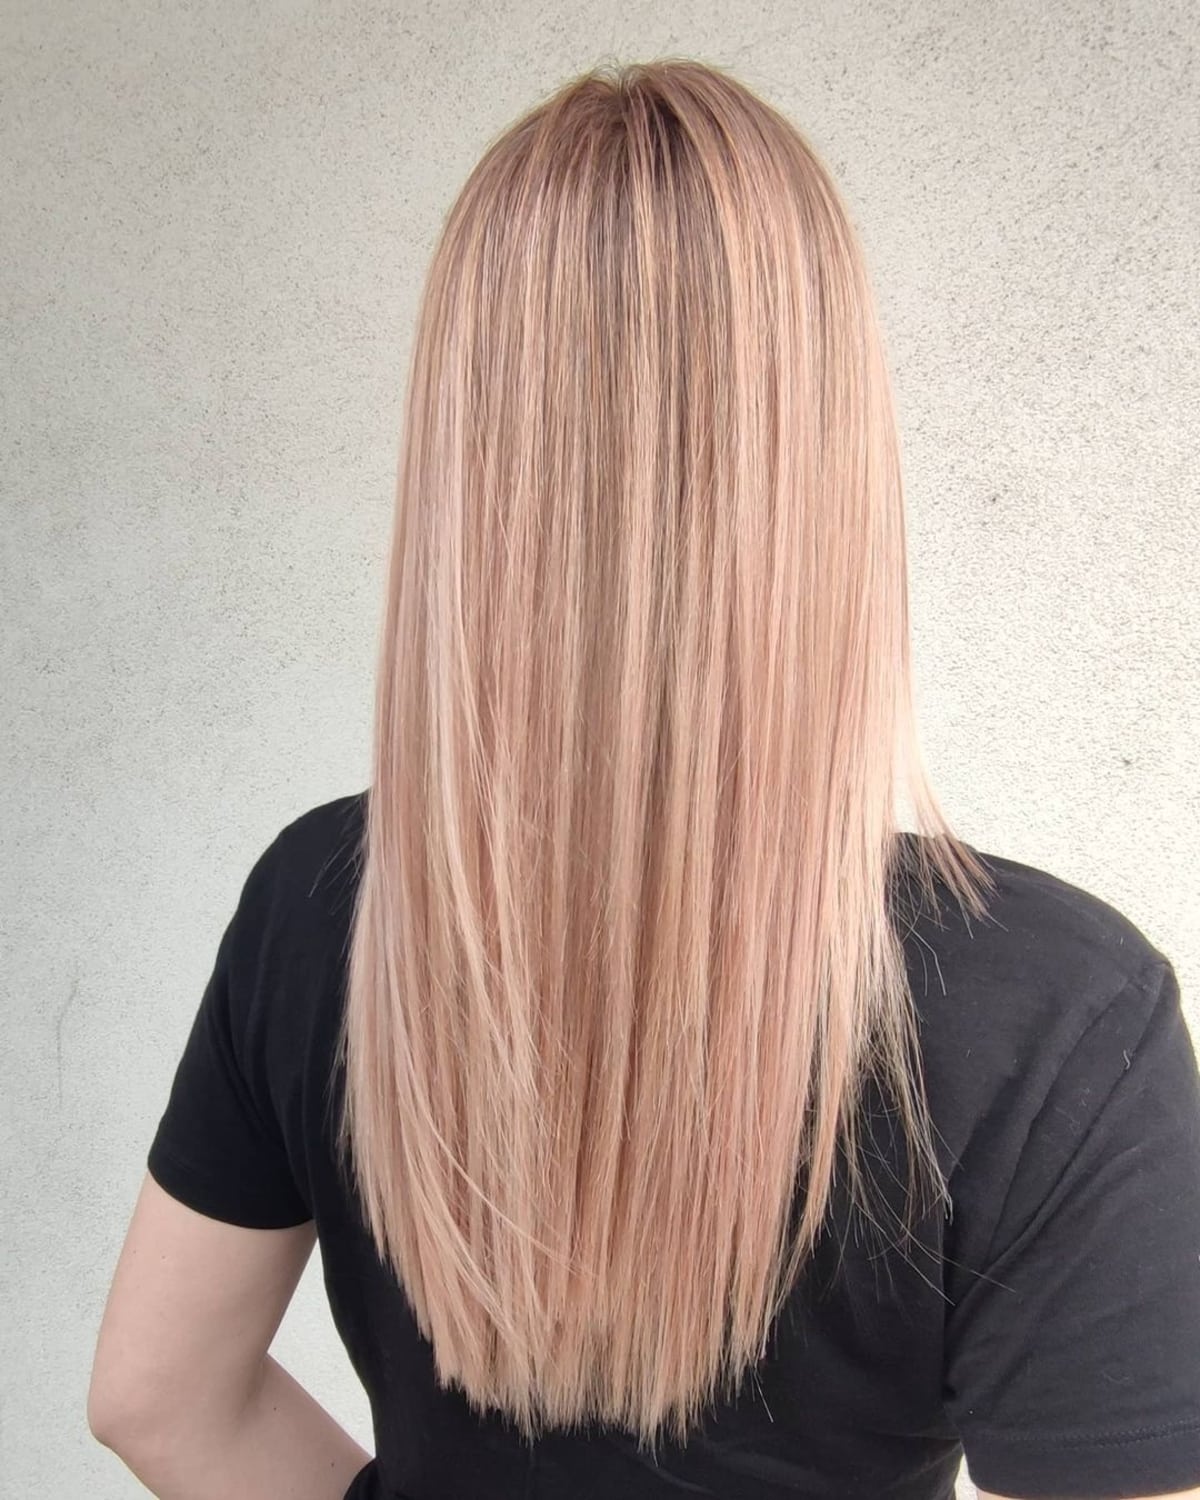 21 Best Light Pink Hair Color Ideas (Pictures for 2021)